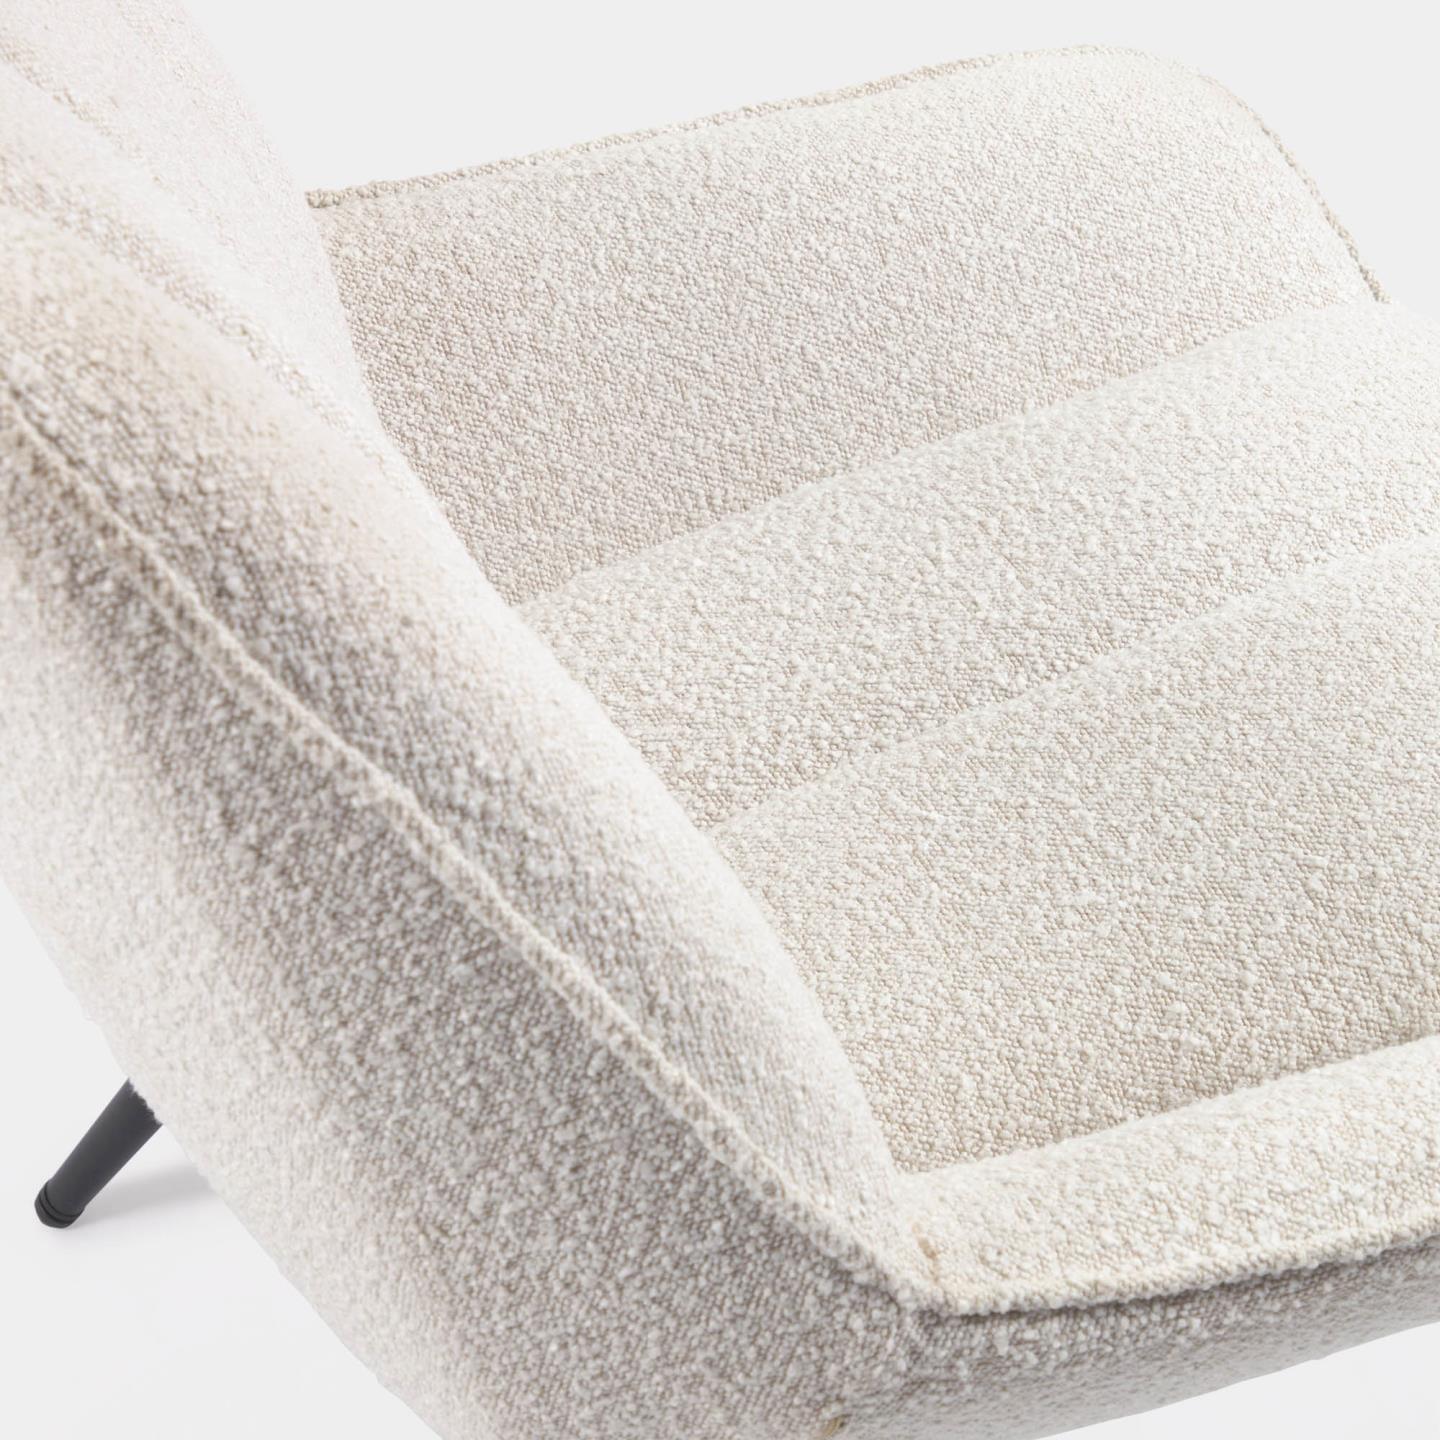 Kave Home Marlina fauteuil wit fleece